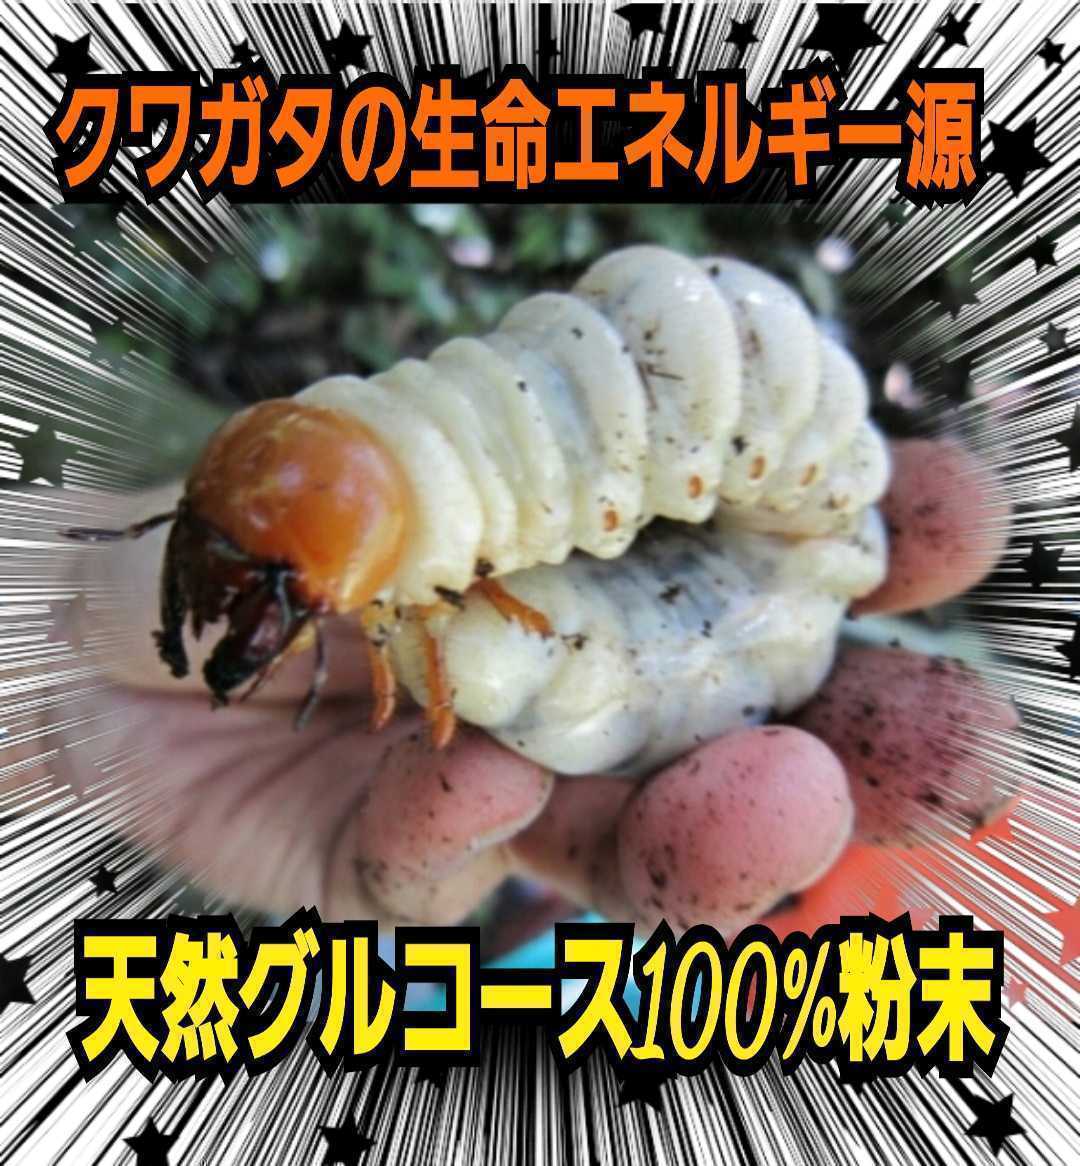  stag beetle * rhinoceros beetle exclusive use nutrition source gru course powder size up, production egg number up, length . exceptionally effective! mat .. thread * jelly .... only.!